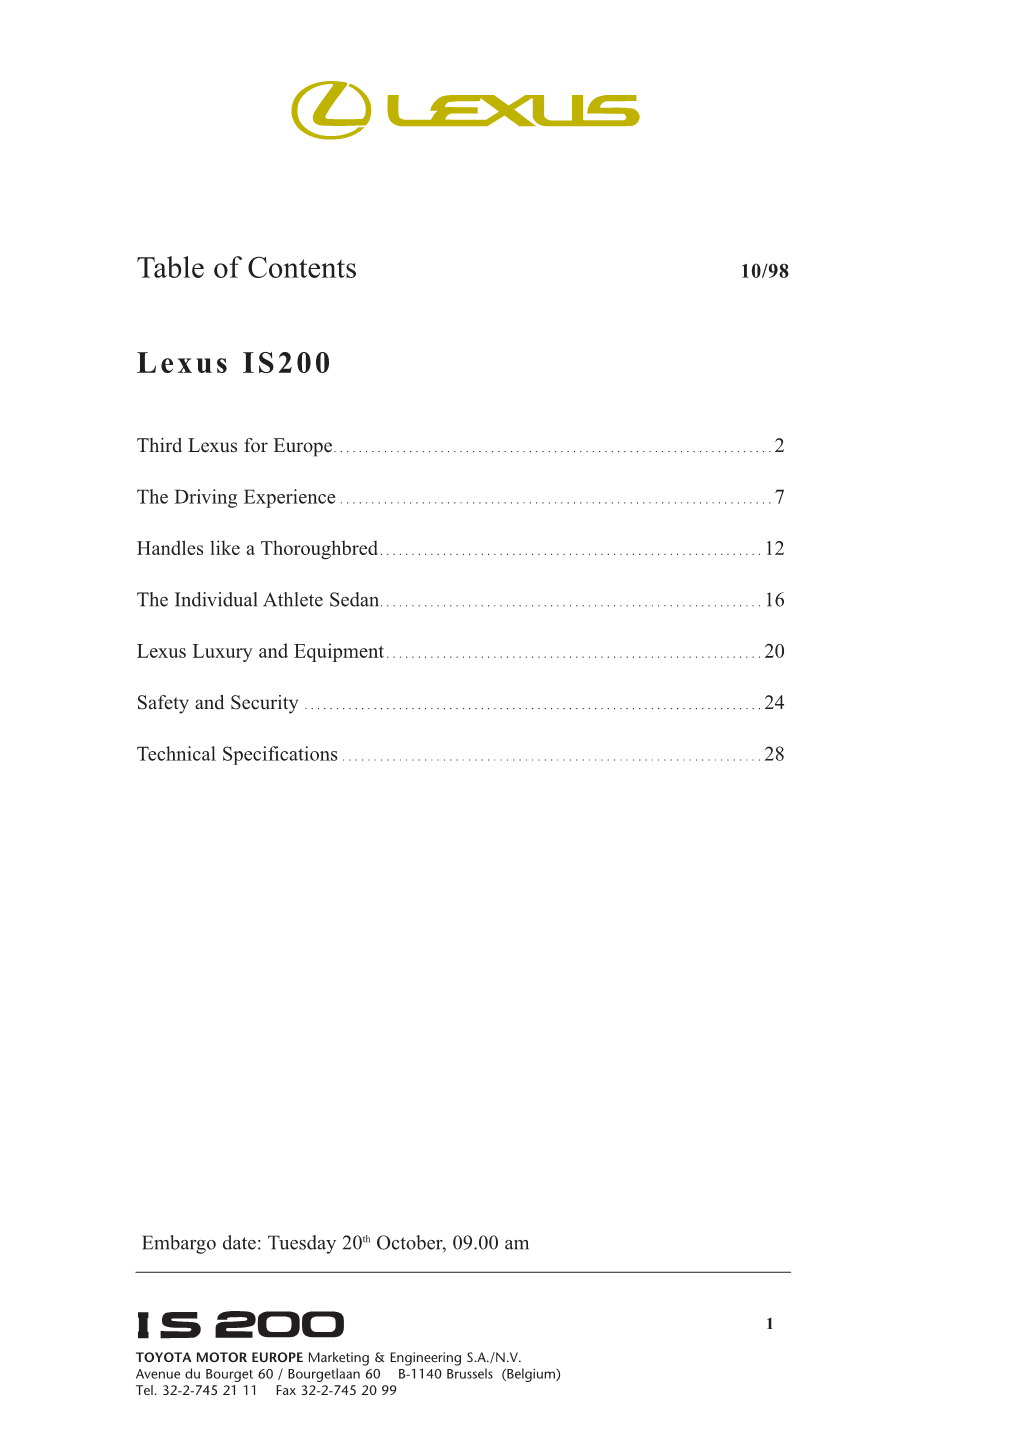 Table of Contents Lexus IS200